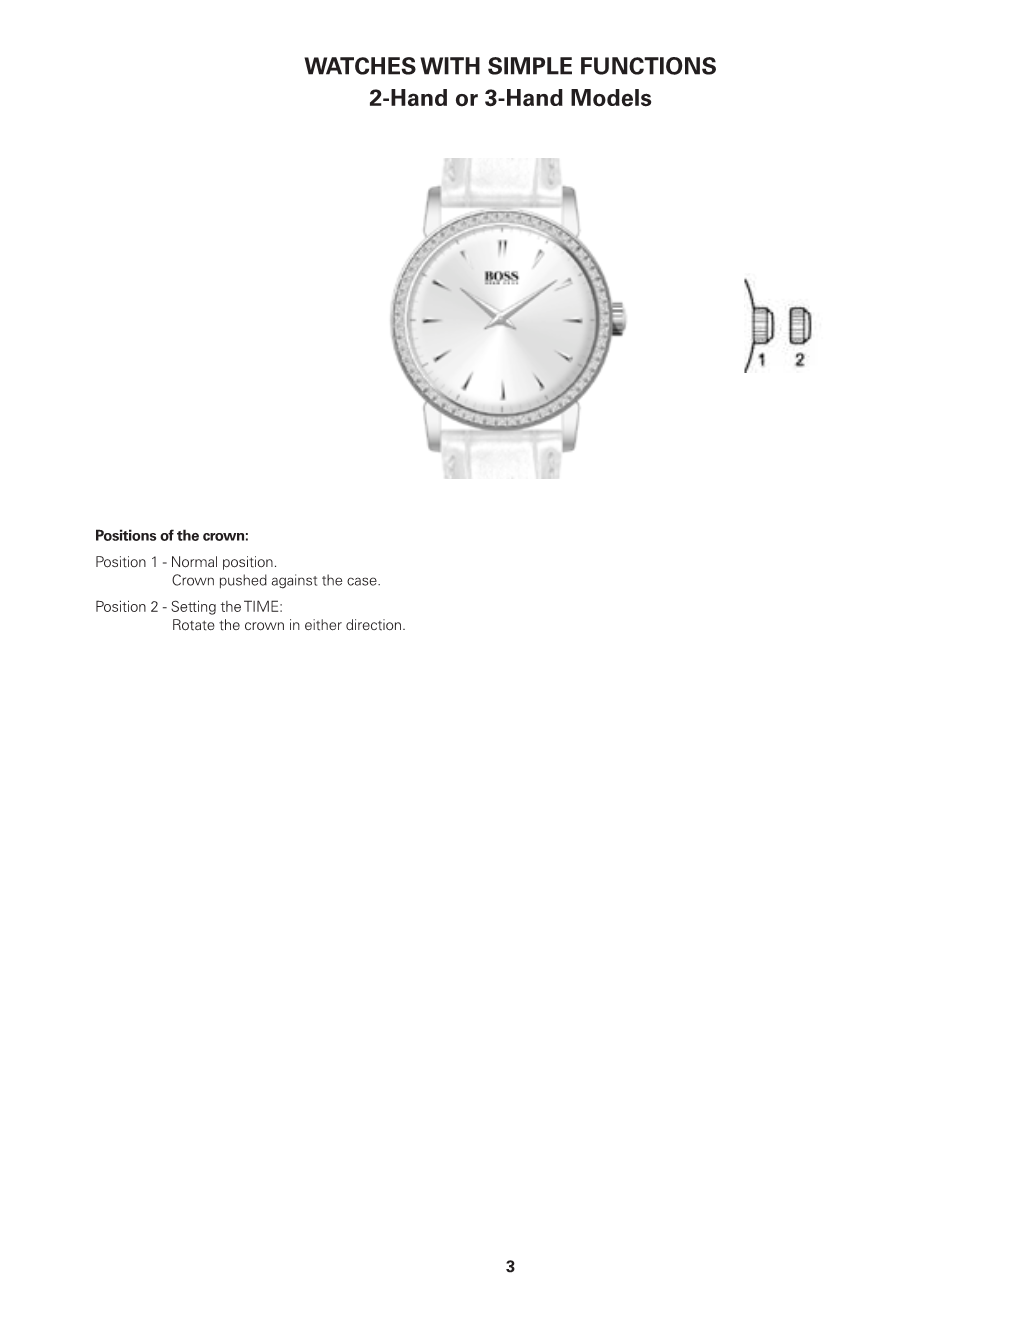 WATCHES with SIMPLE FUNCTIONS 2-Hand Or 3-Hand Models